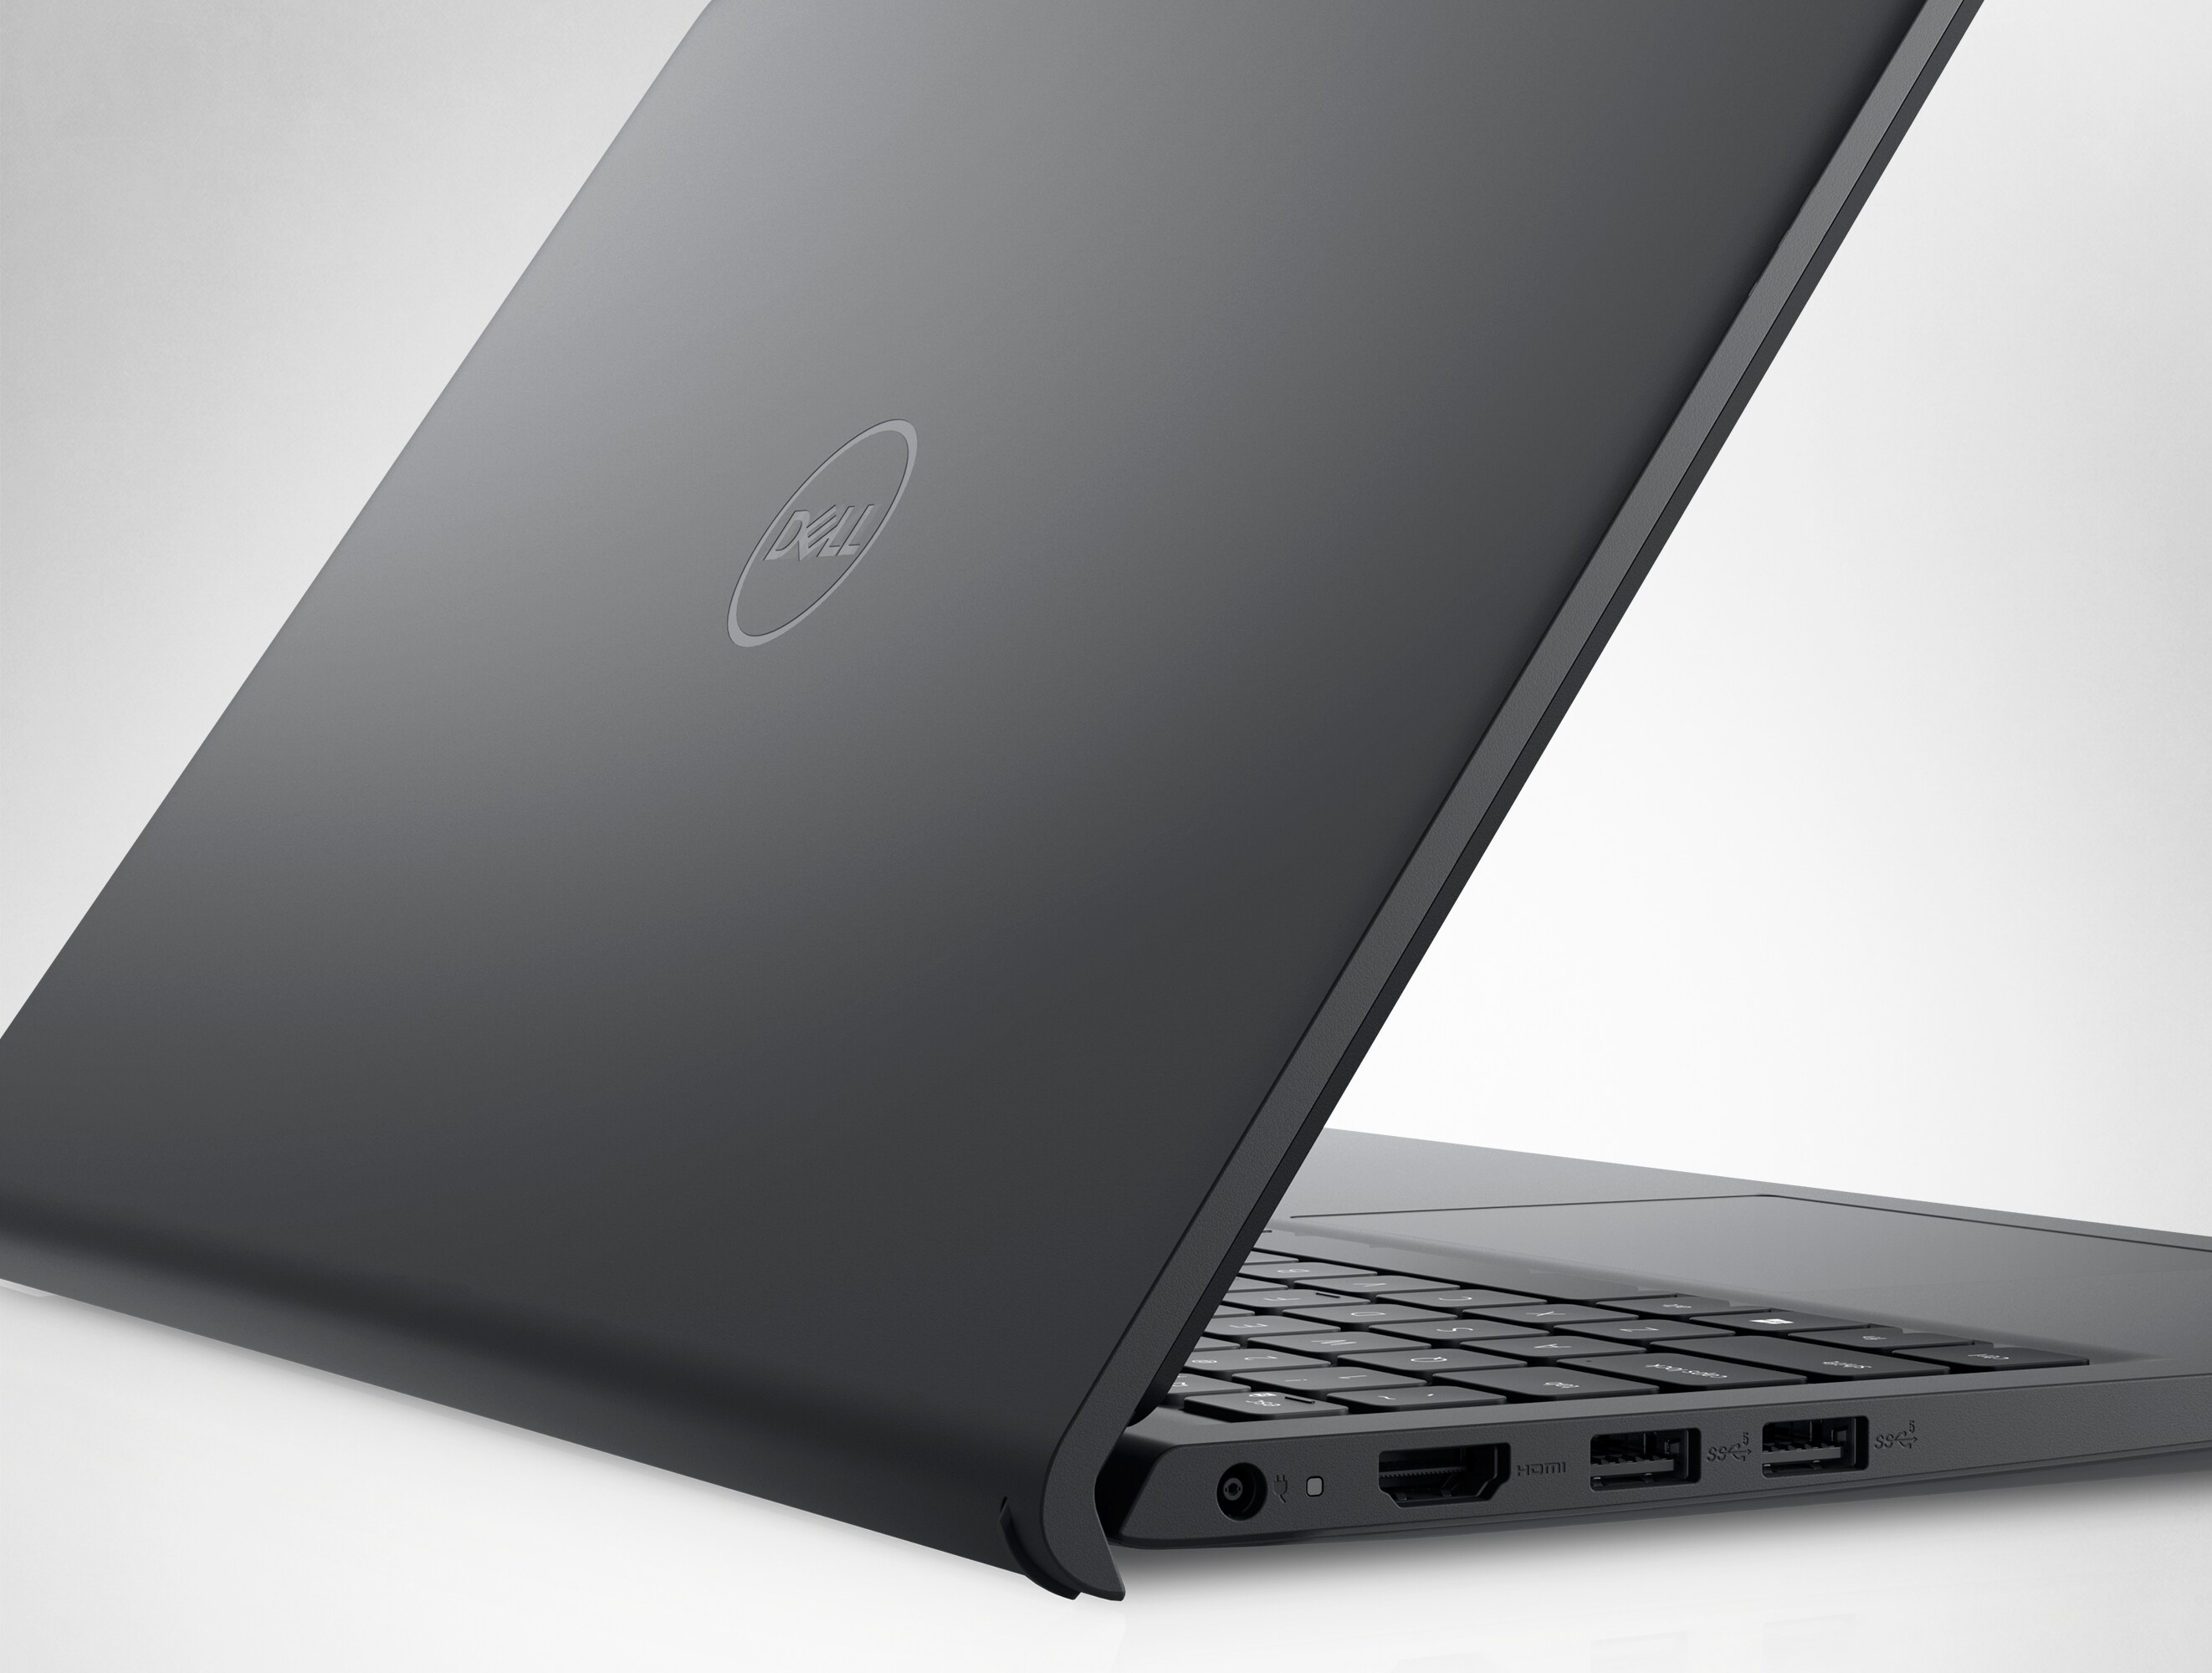 Picture of an opened Dell Inspiron 15 3521 Laptop with its back and Dell’s logo visible.